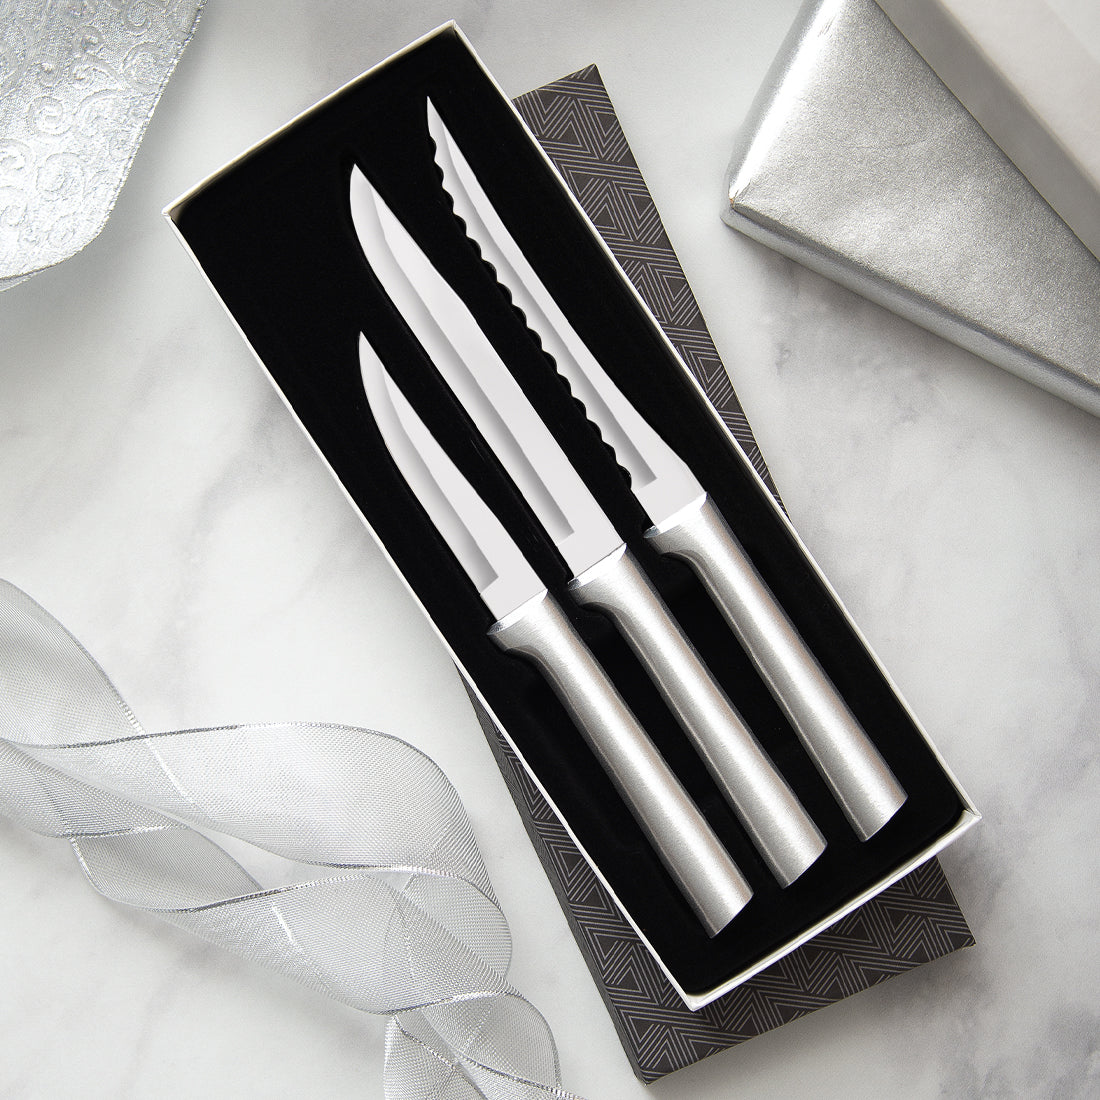 A Cooking Essentials Gift Set on a marble countertop with silver ribbons.